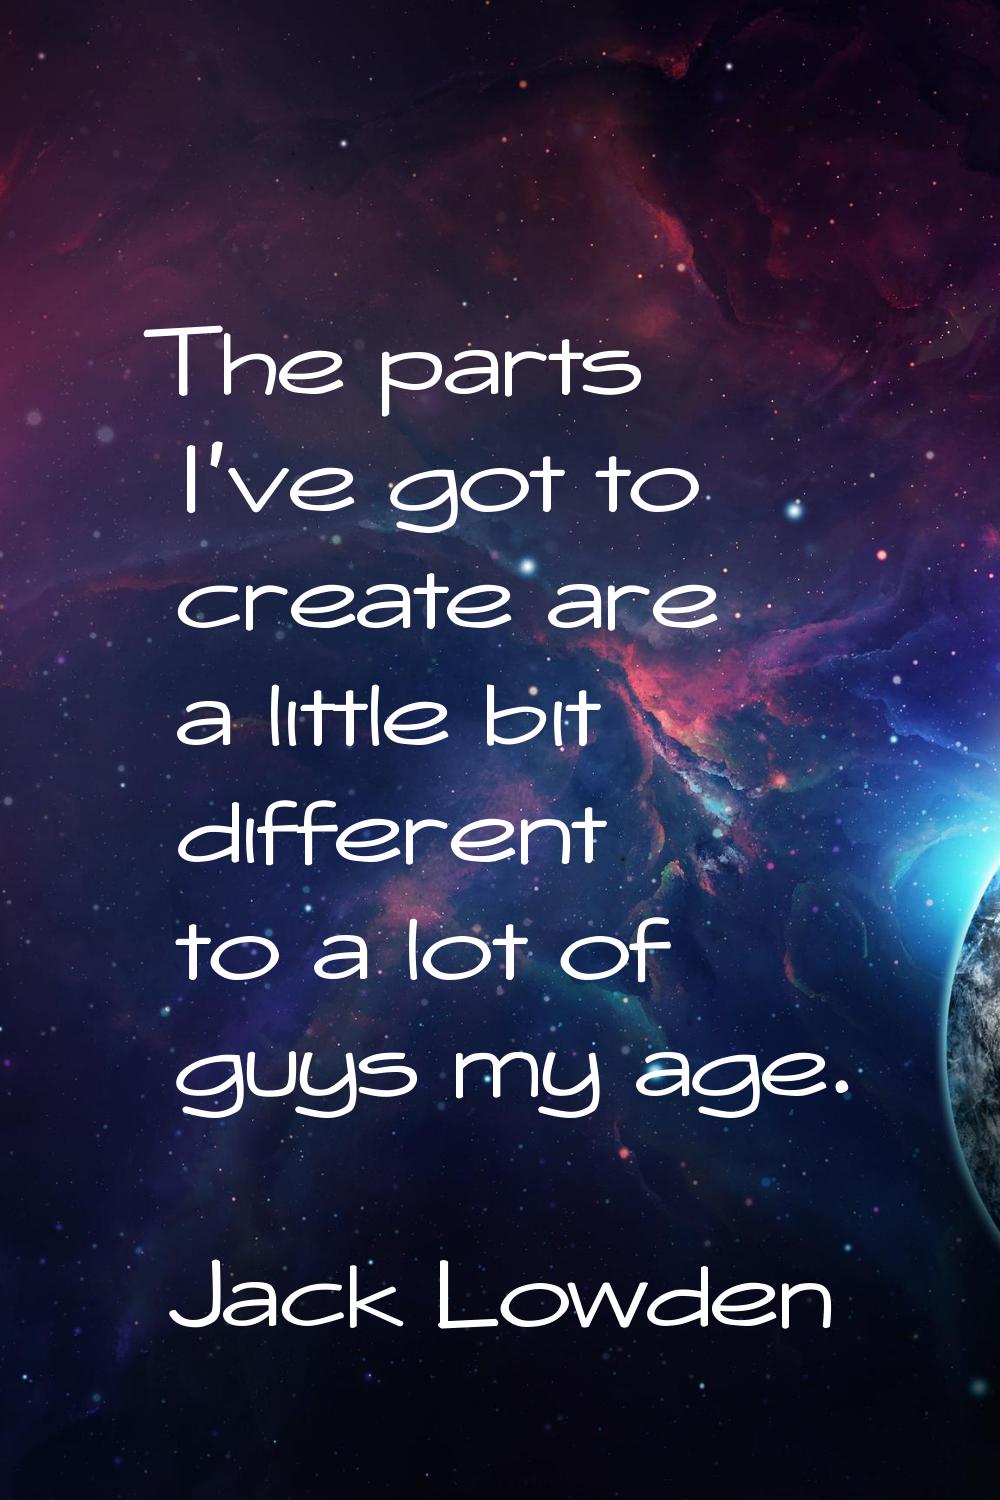 The parts I've got to create are a little bit different to a lot of guys my age.